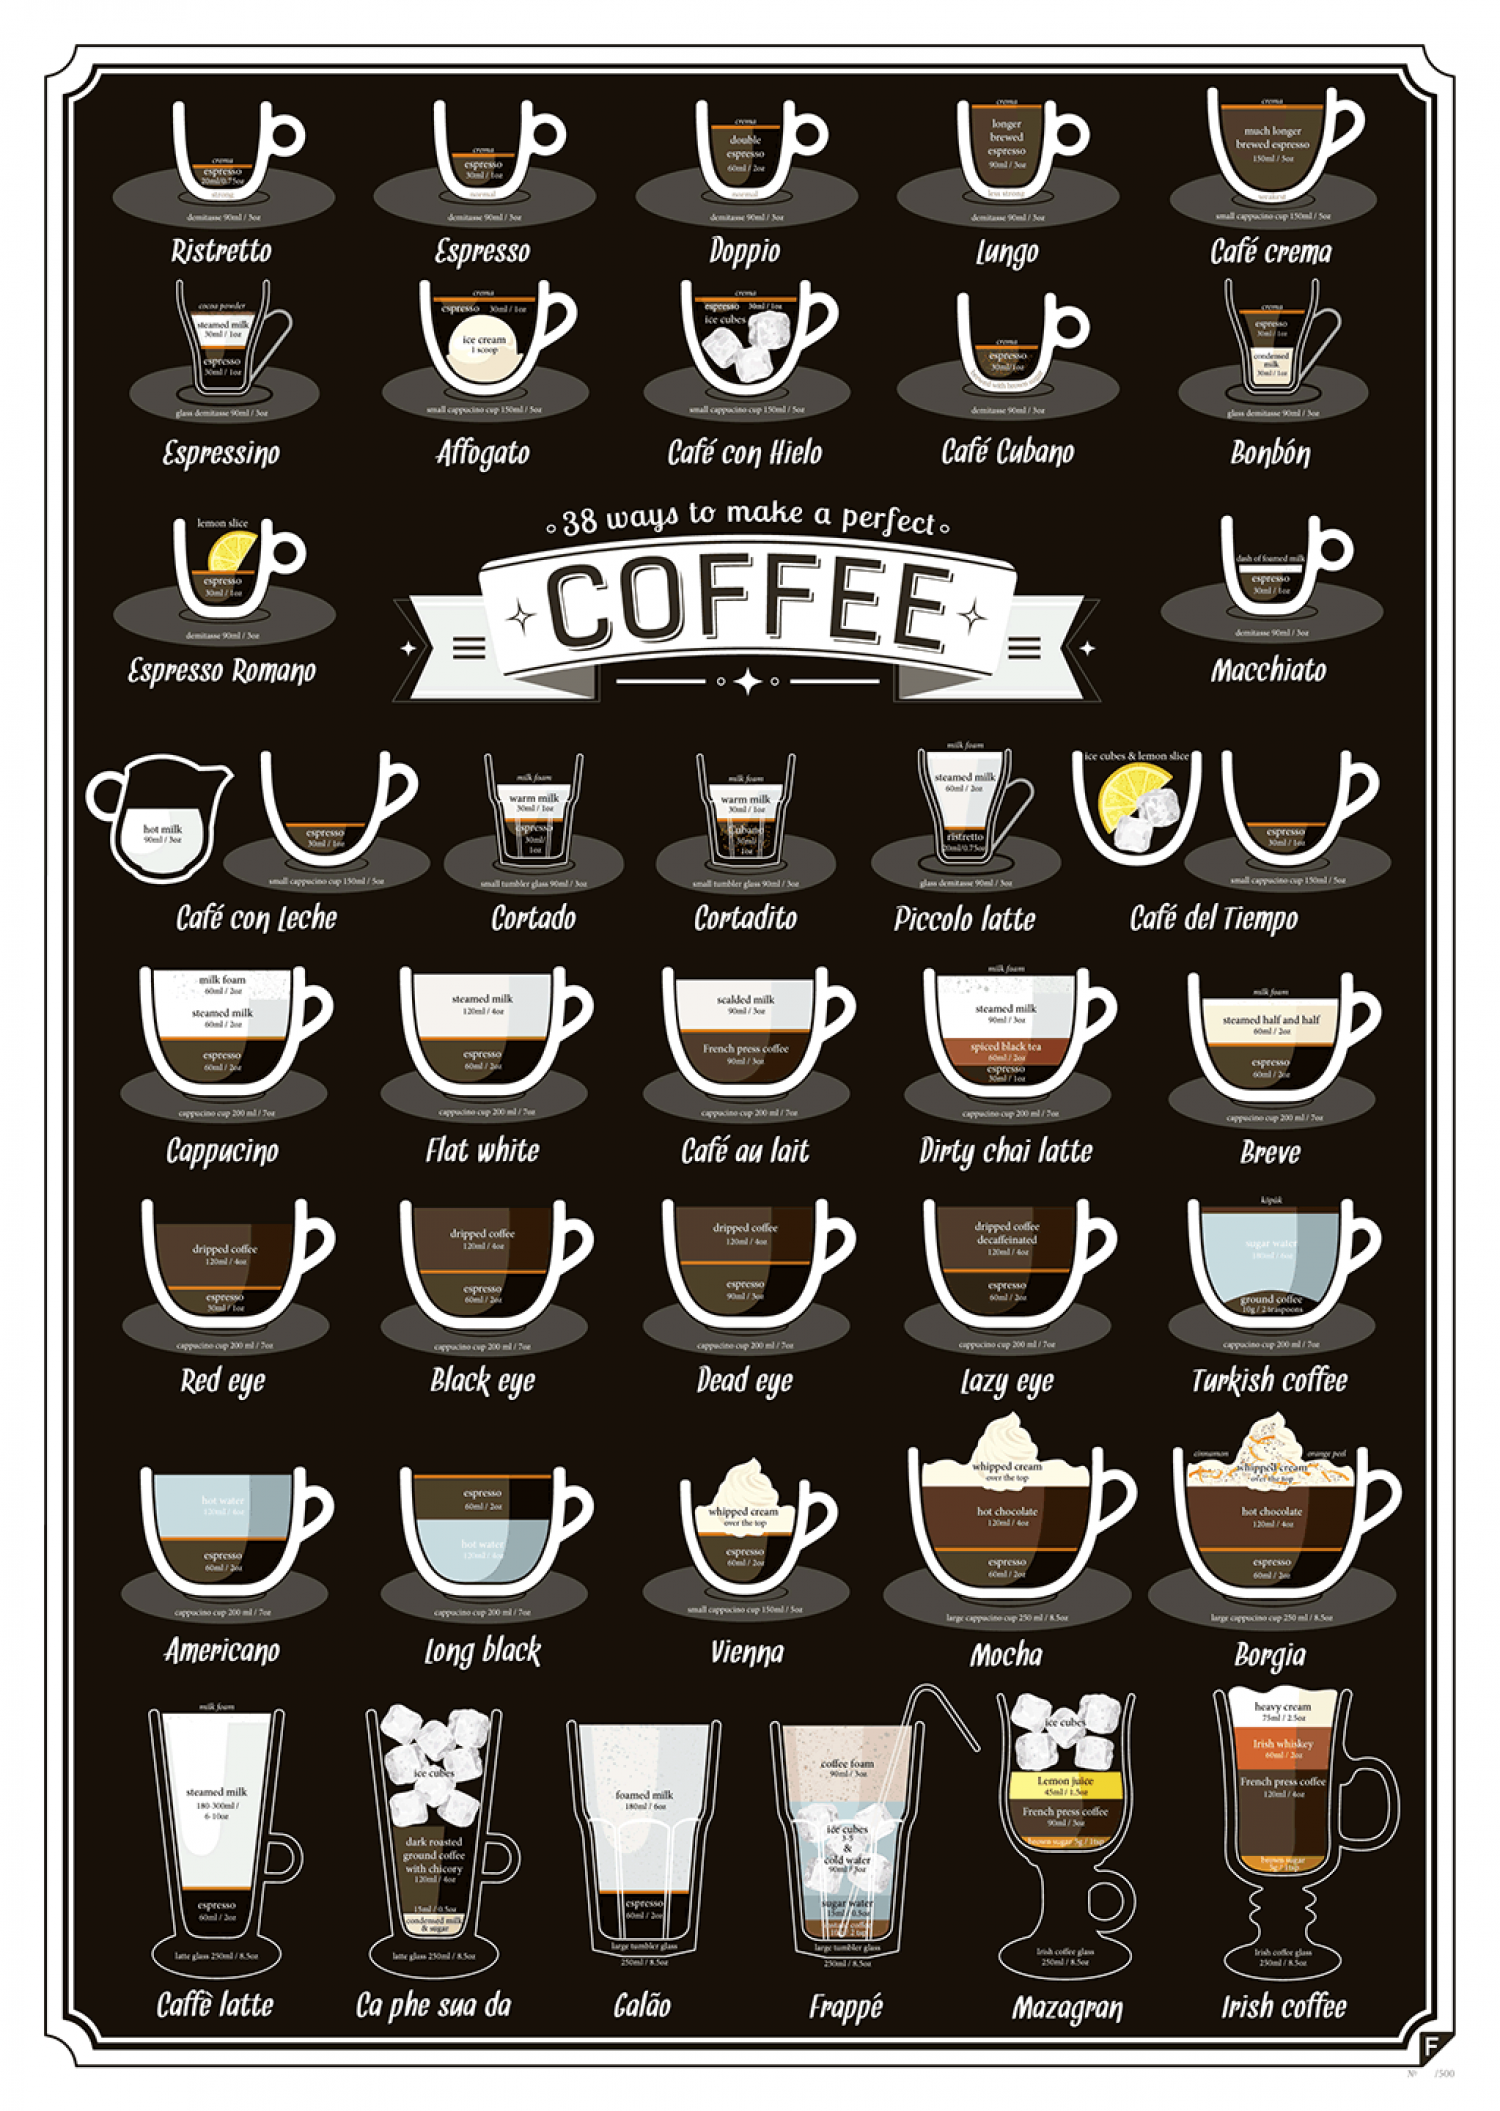 38 ways to make a perfect Coffee